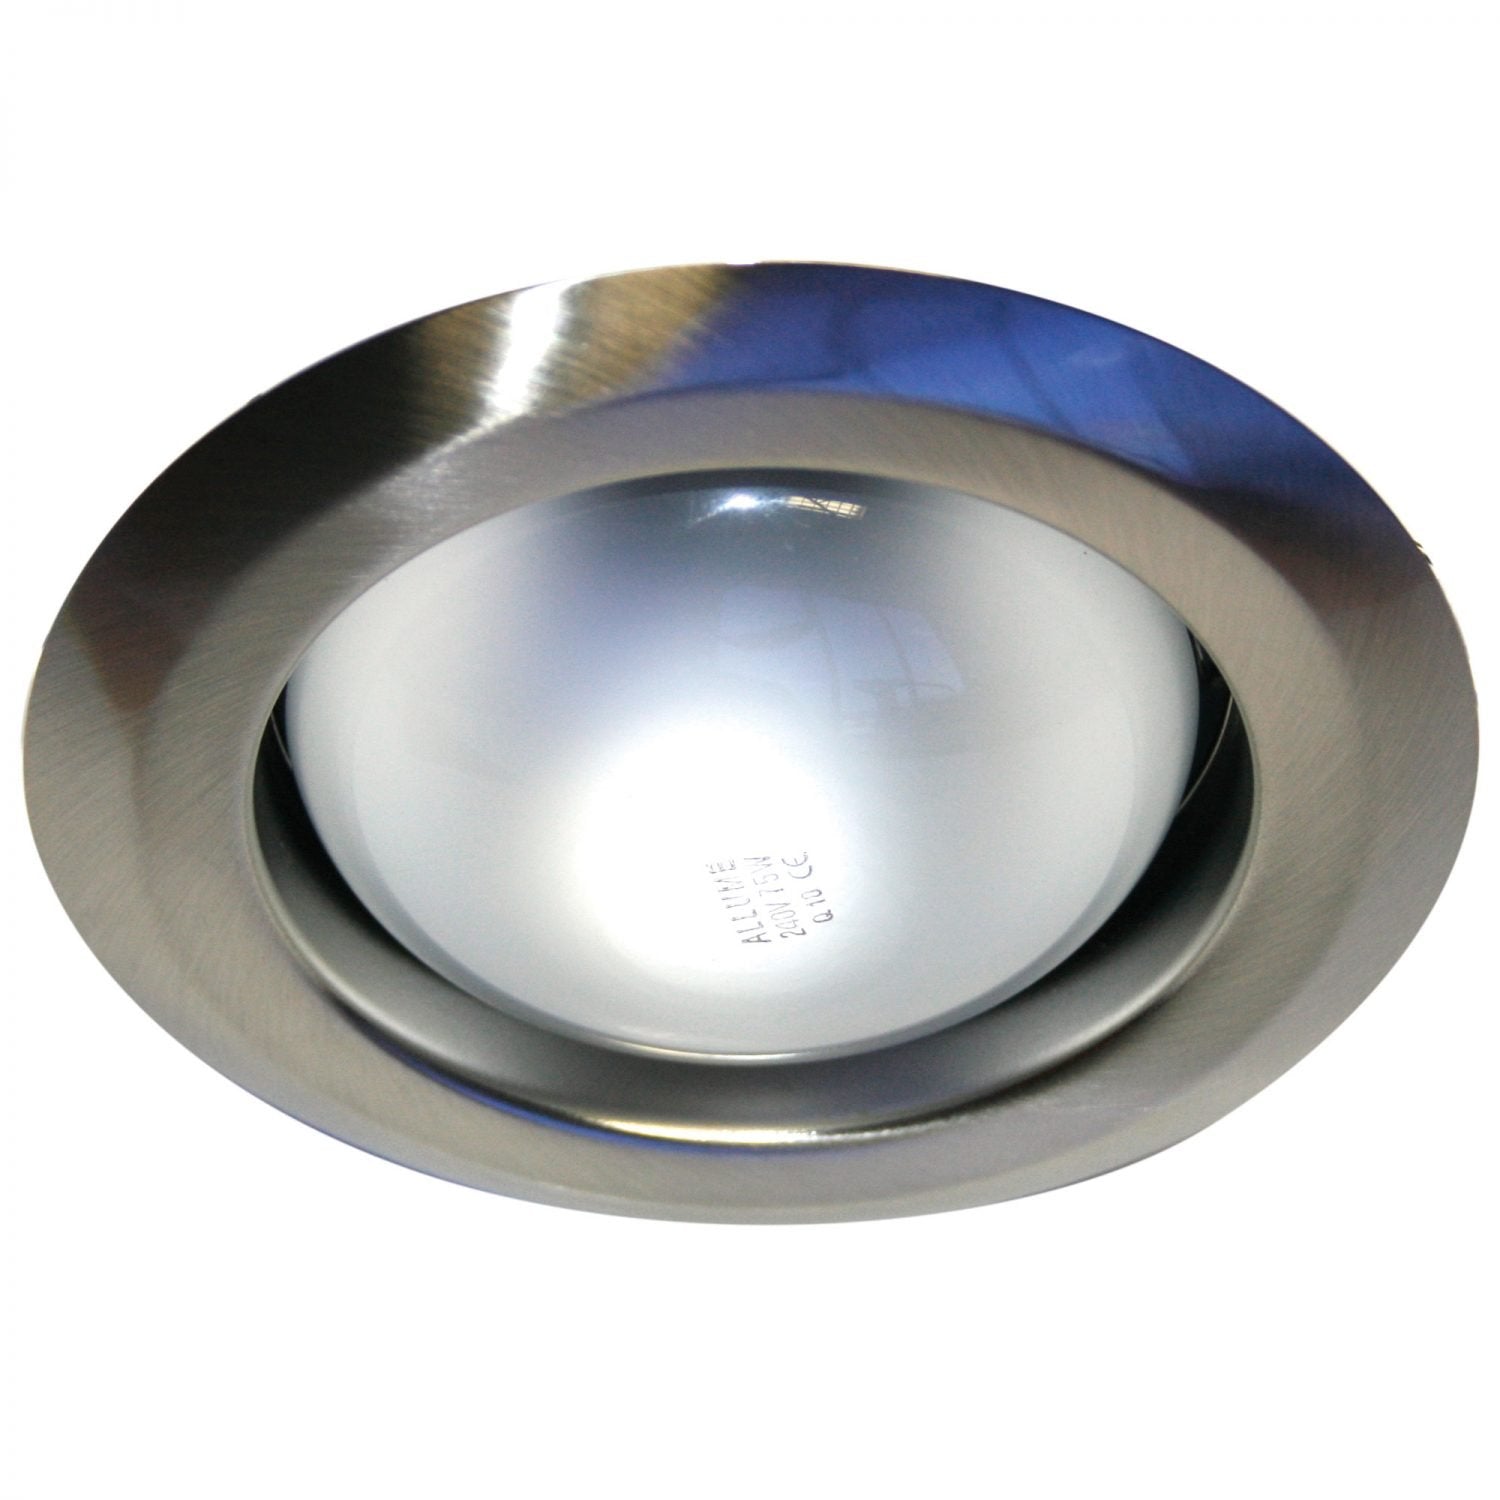 Project R80 Downlight Brushed Chrome - LF4325BCH